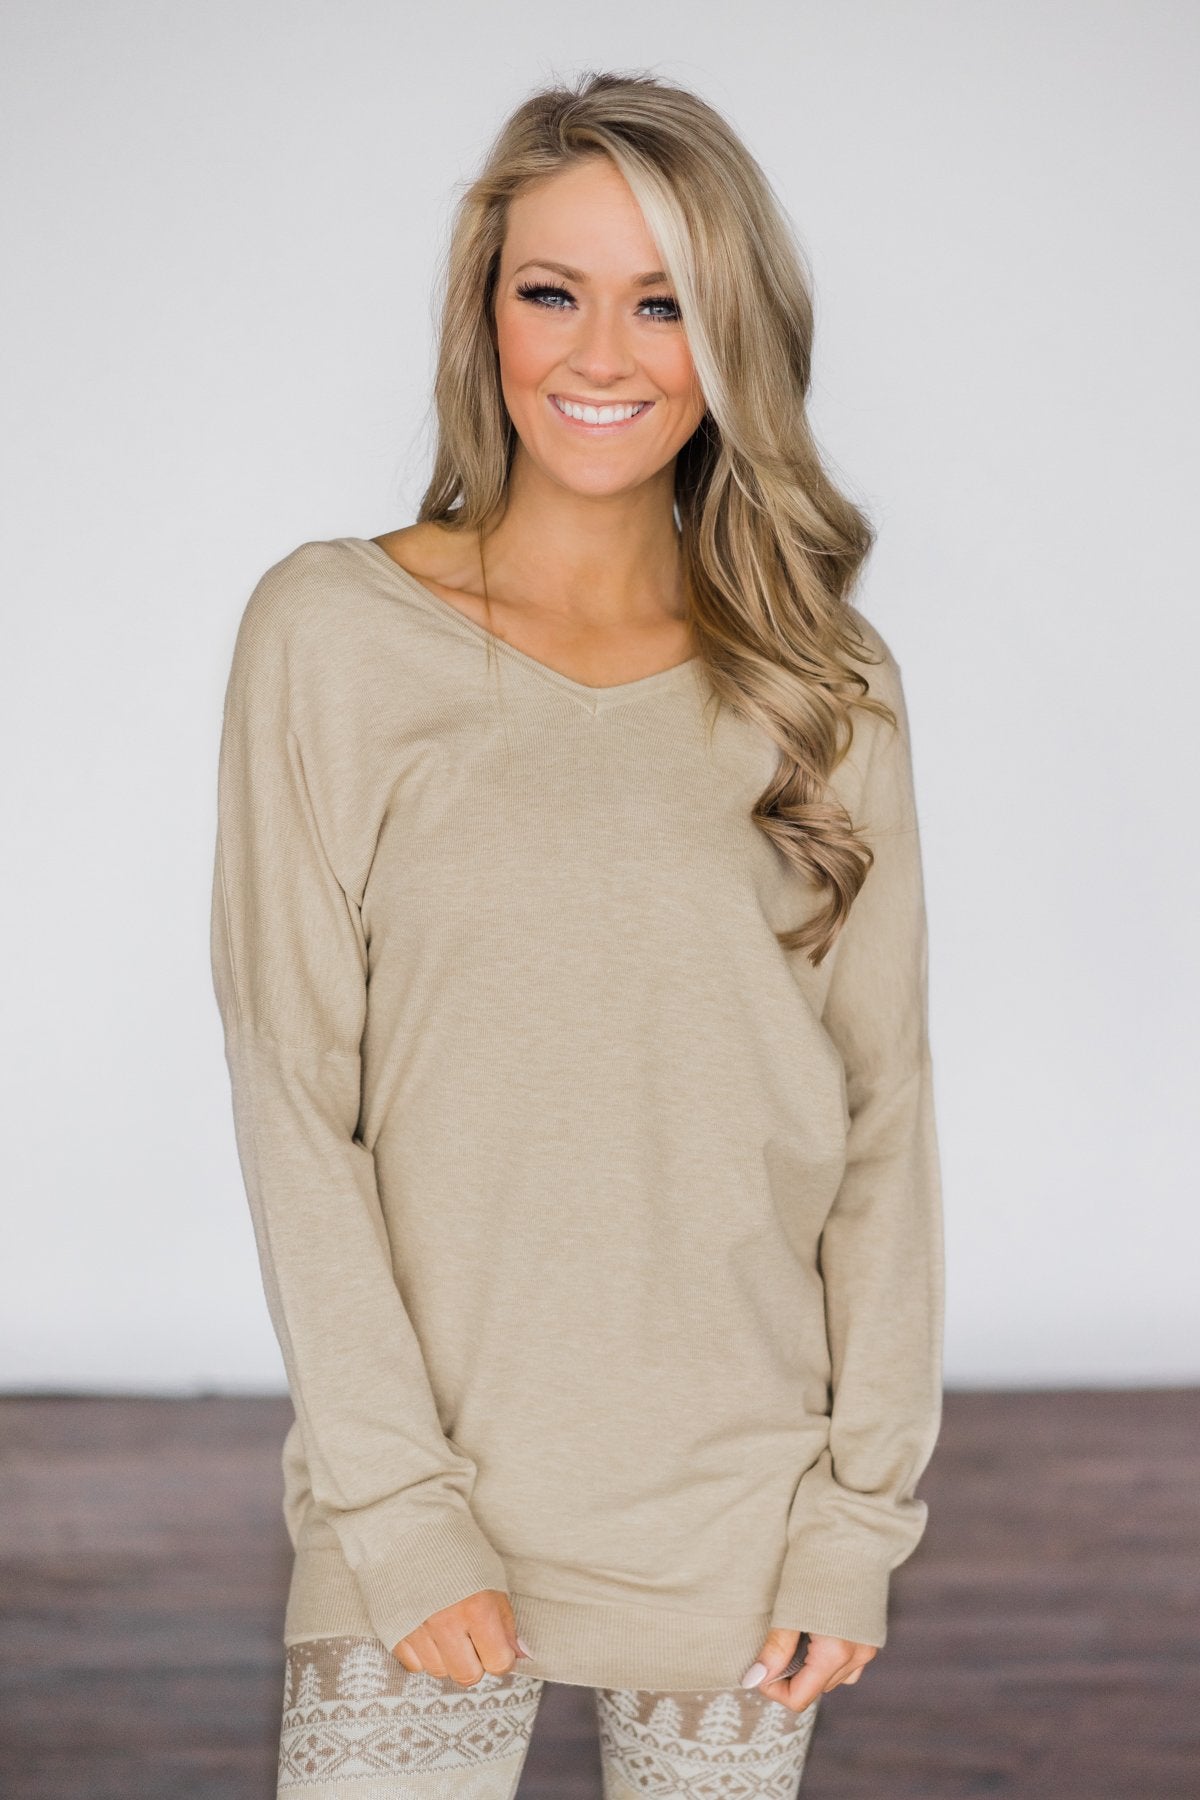 Criss Cross Back Detail Sweater - Taupe